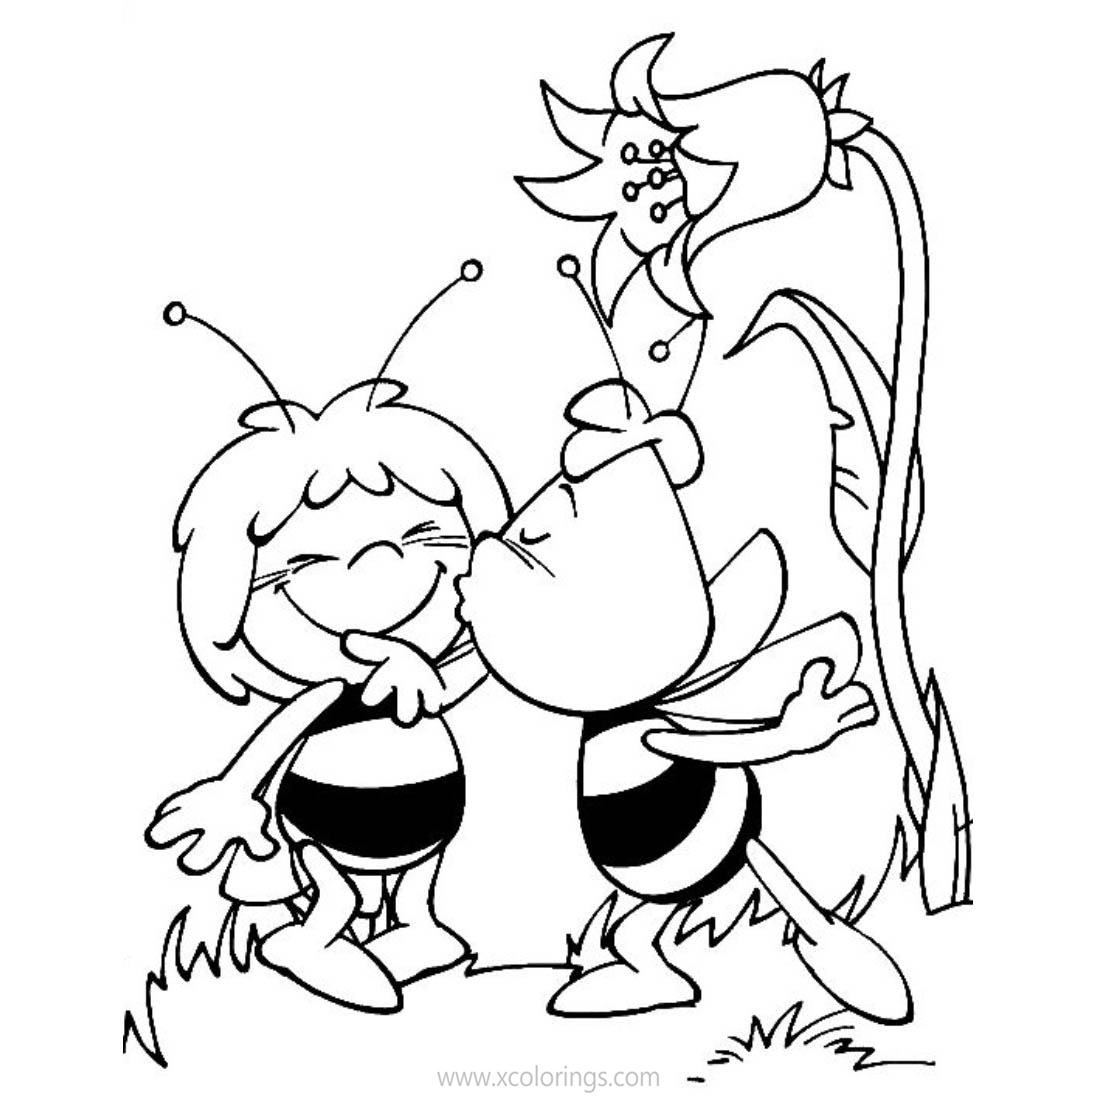 Free Willy Kissing Maya the Bee Coloring Pages printable